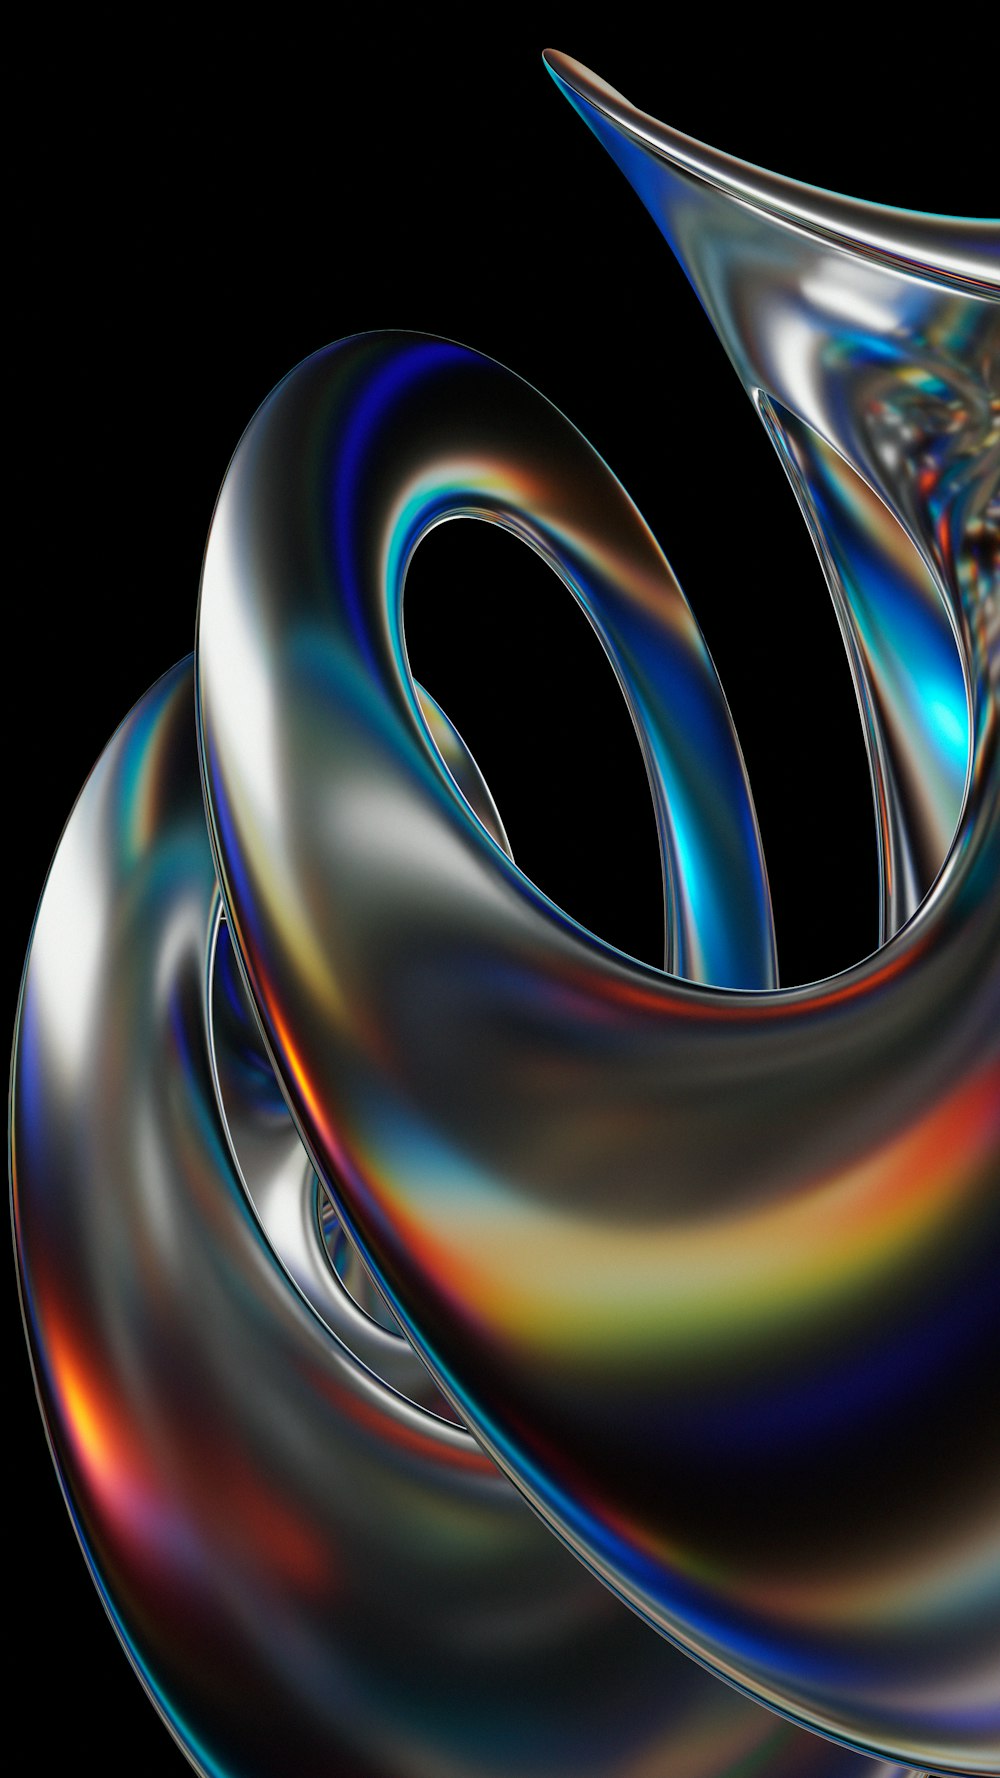 a computer generated image of a spiral like object